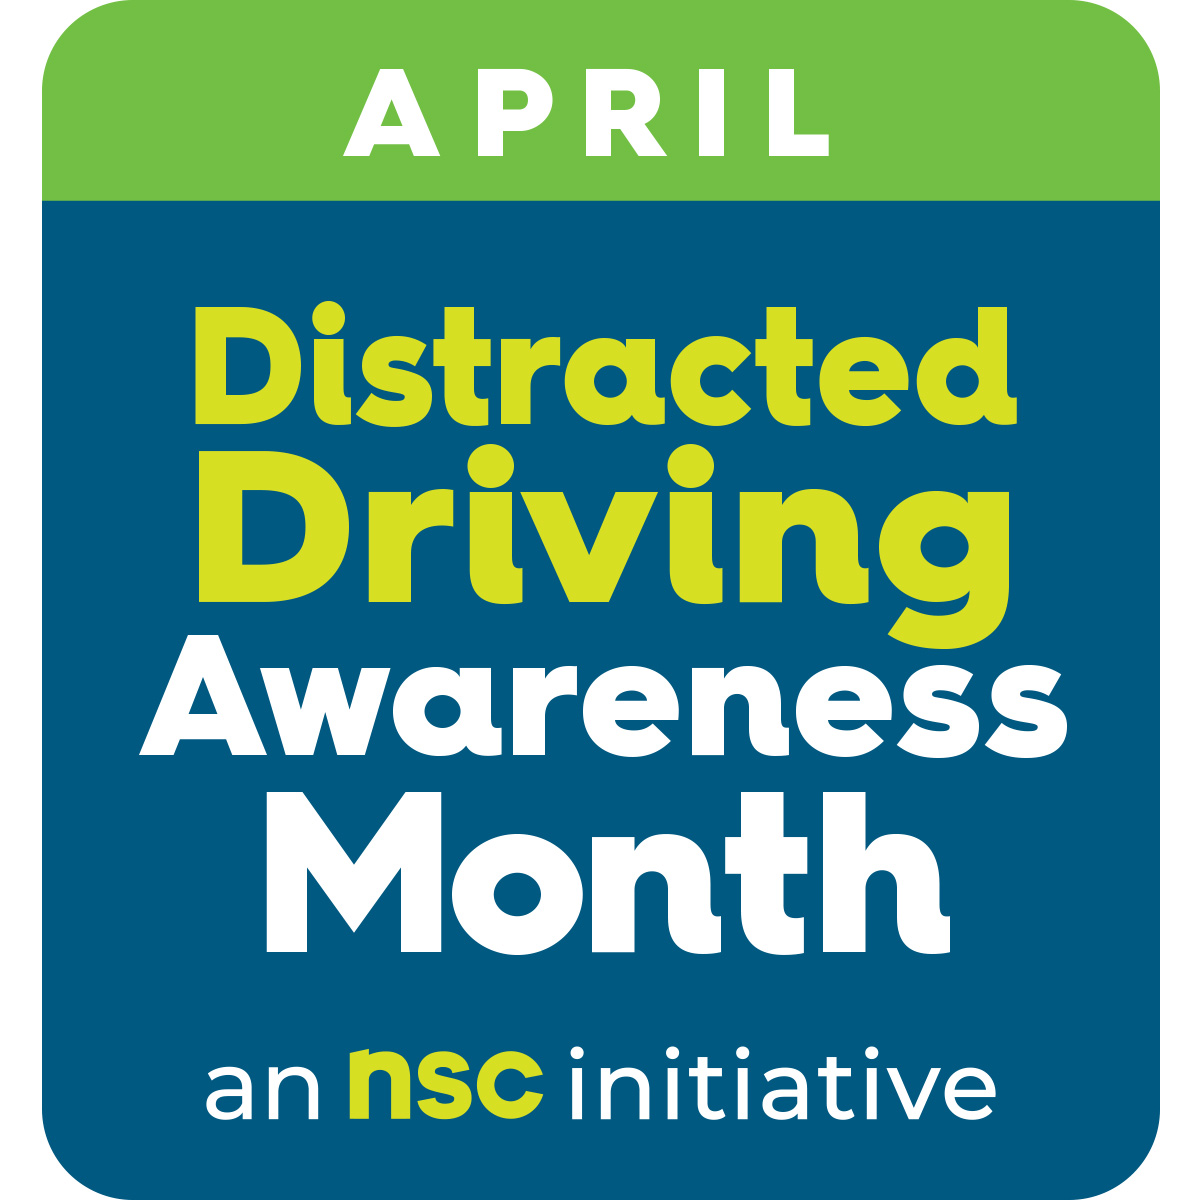 April is Distracted Driving Awareness Month.  An average of 9 people a day are killed by distracted driving. #JustDrive during #DDAM to help #KeepEachOtherSafe. NSC offers free resources to help make sure everyone gets home safe: bit.ly/nscddam2024.